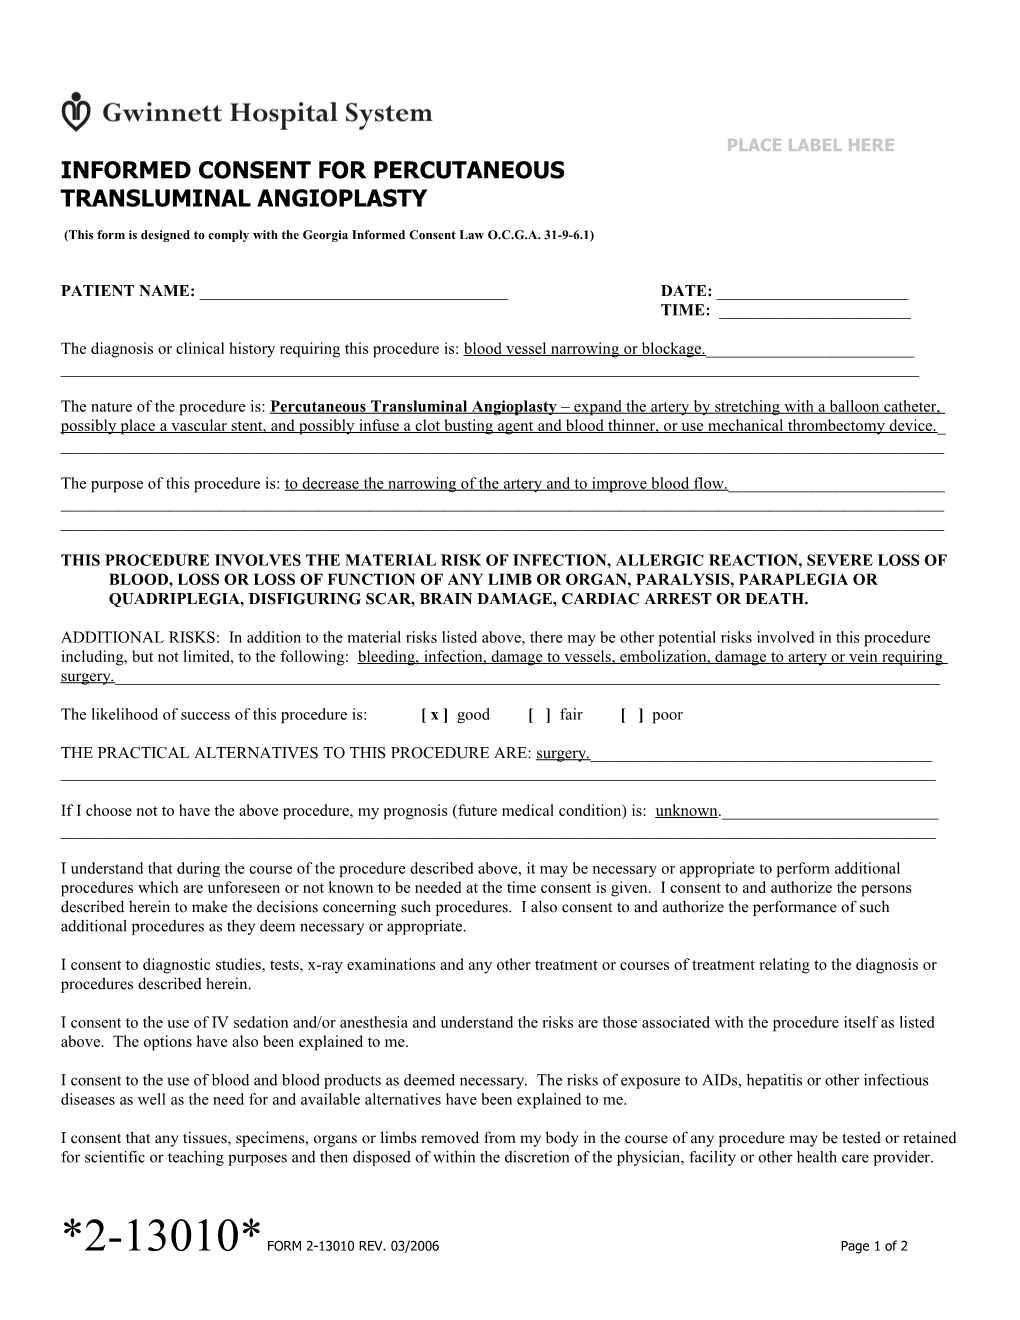 This Form Is Designed to Comply with the Georgia Informed Consent Law O.C.G.A. 31-9-6.1